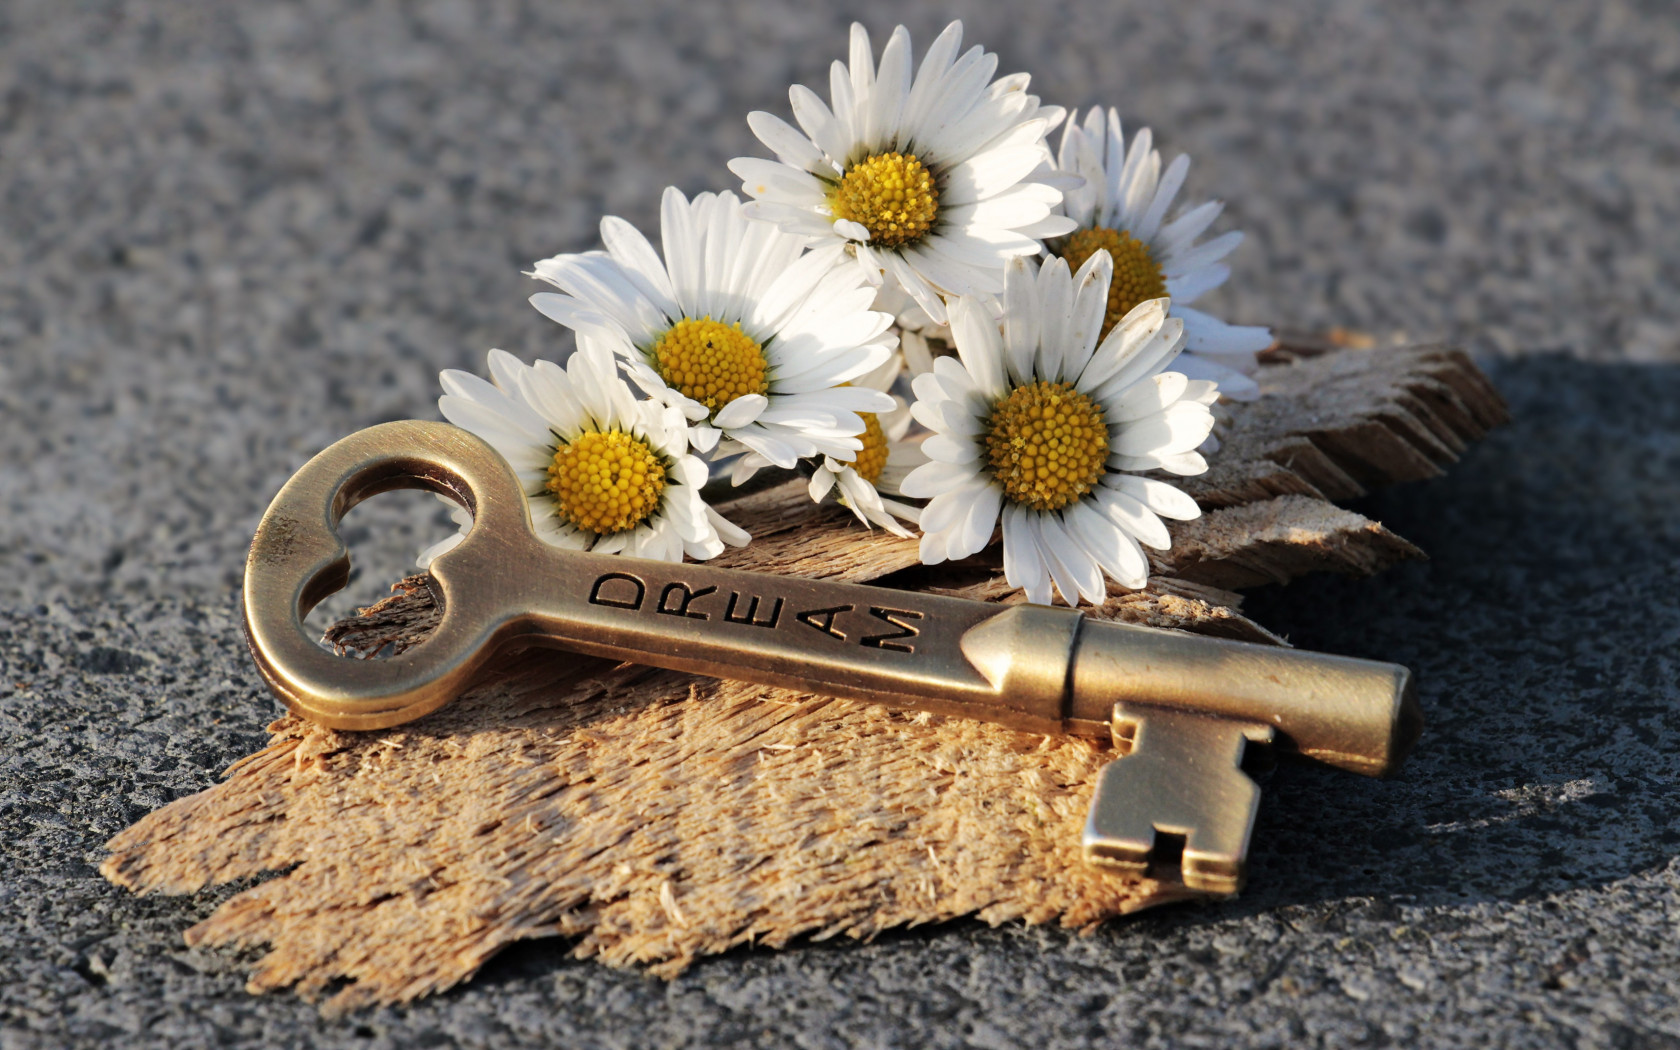 The dreams key and daisy flowers wallpaper 1680x1050